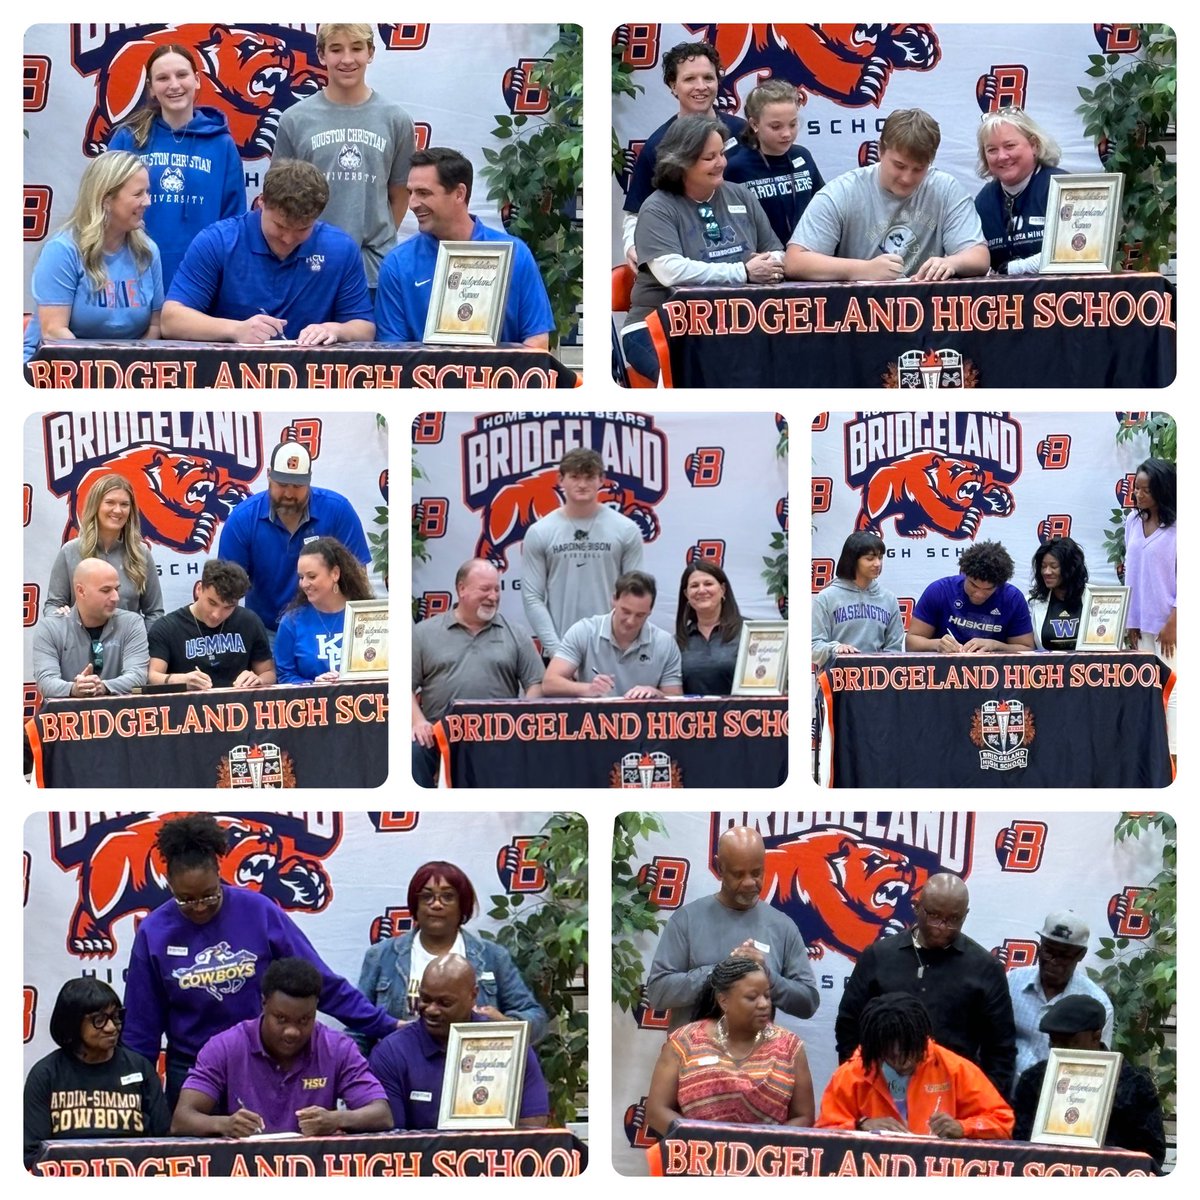 Huge National Signing Day @BridgelandFB! The class of '24 had a record 7 Senior Bears sign to play at the next level: Two each at Division III, Division II, and DI-FCS, and one DI-FBS Power 4. @FutureBearsFB, if you work hard & stick w/the process, your dreams can come true too.